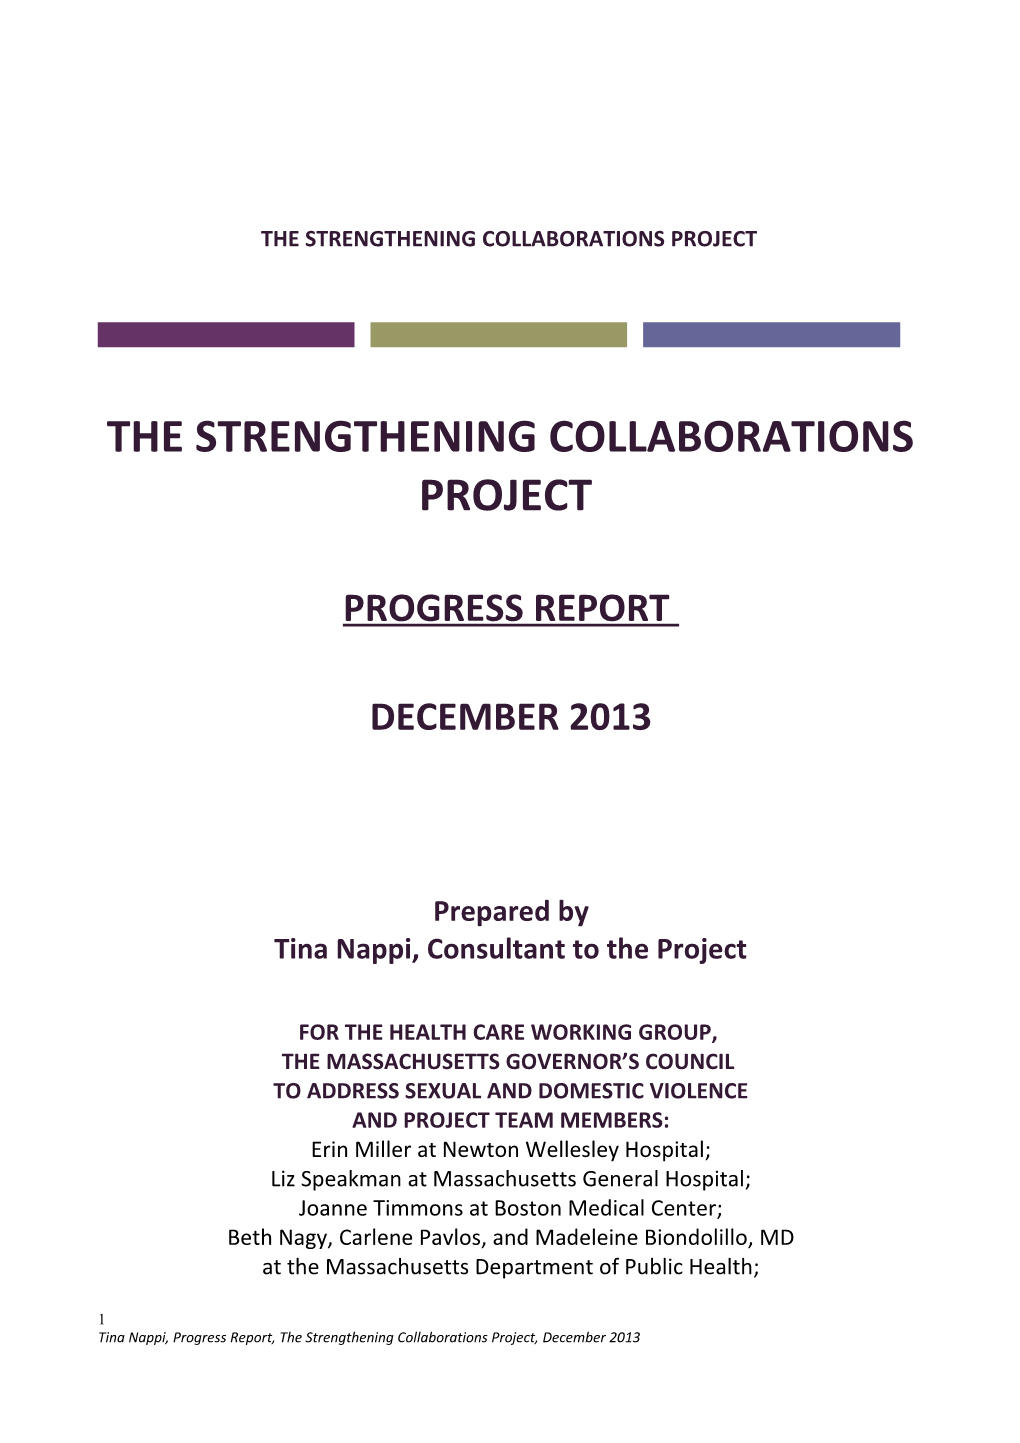 The Strengthening Collaborations Project